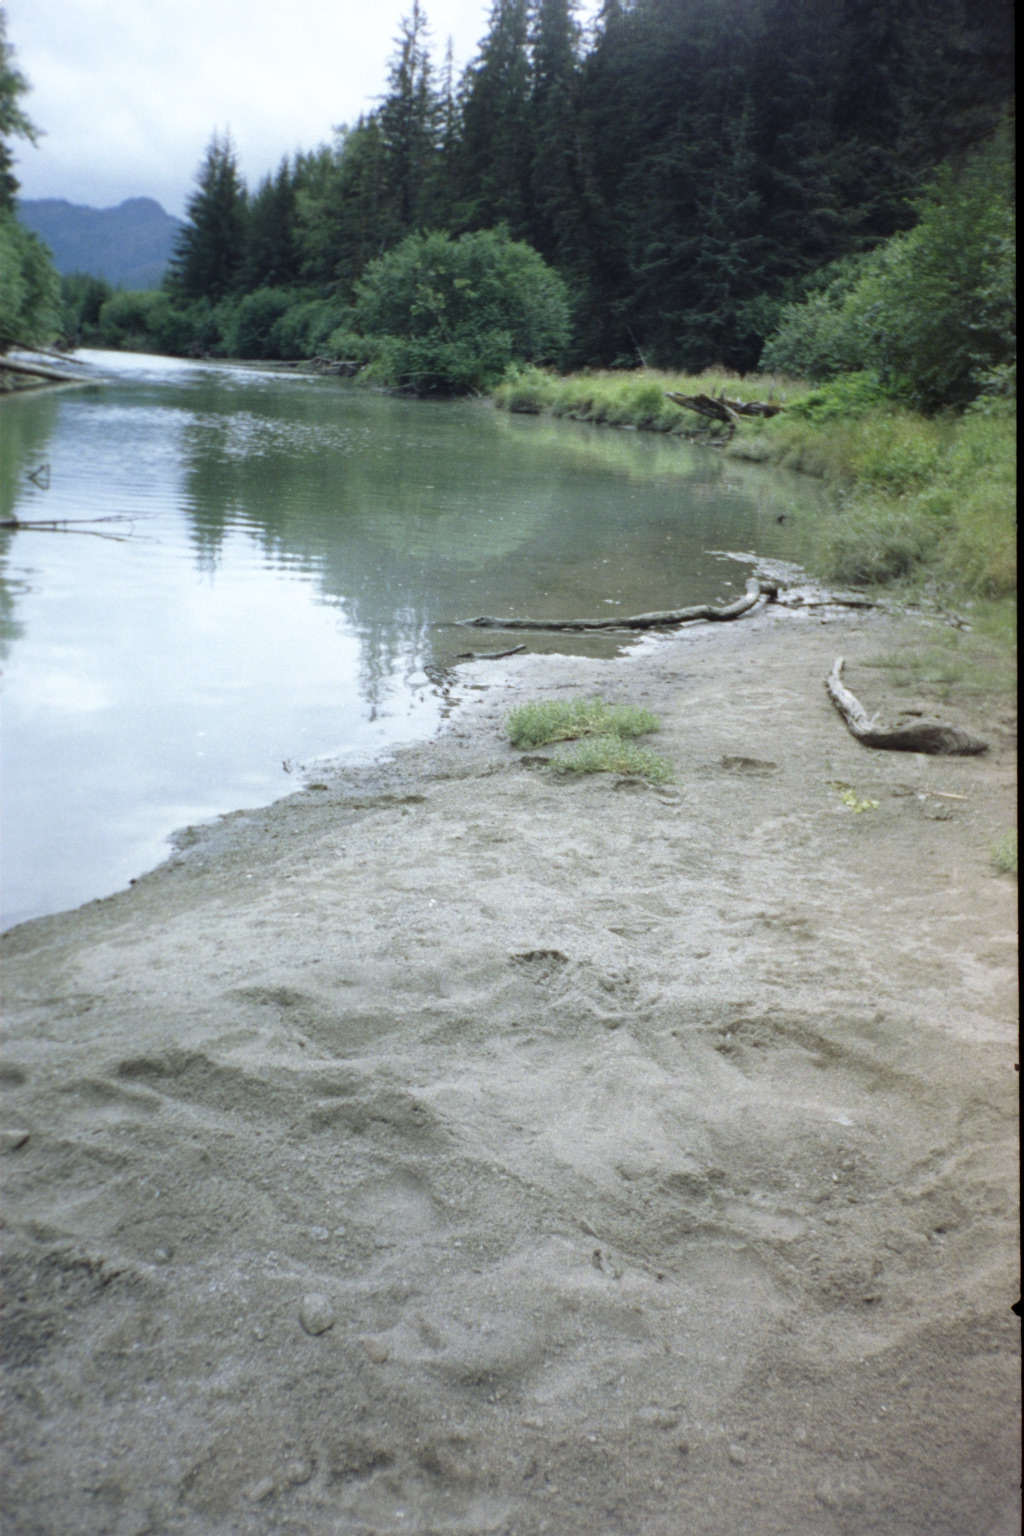 Brown bear bed in the sand by a stream